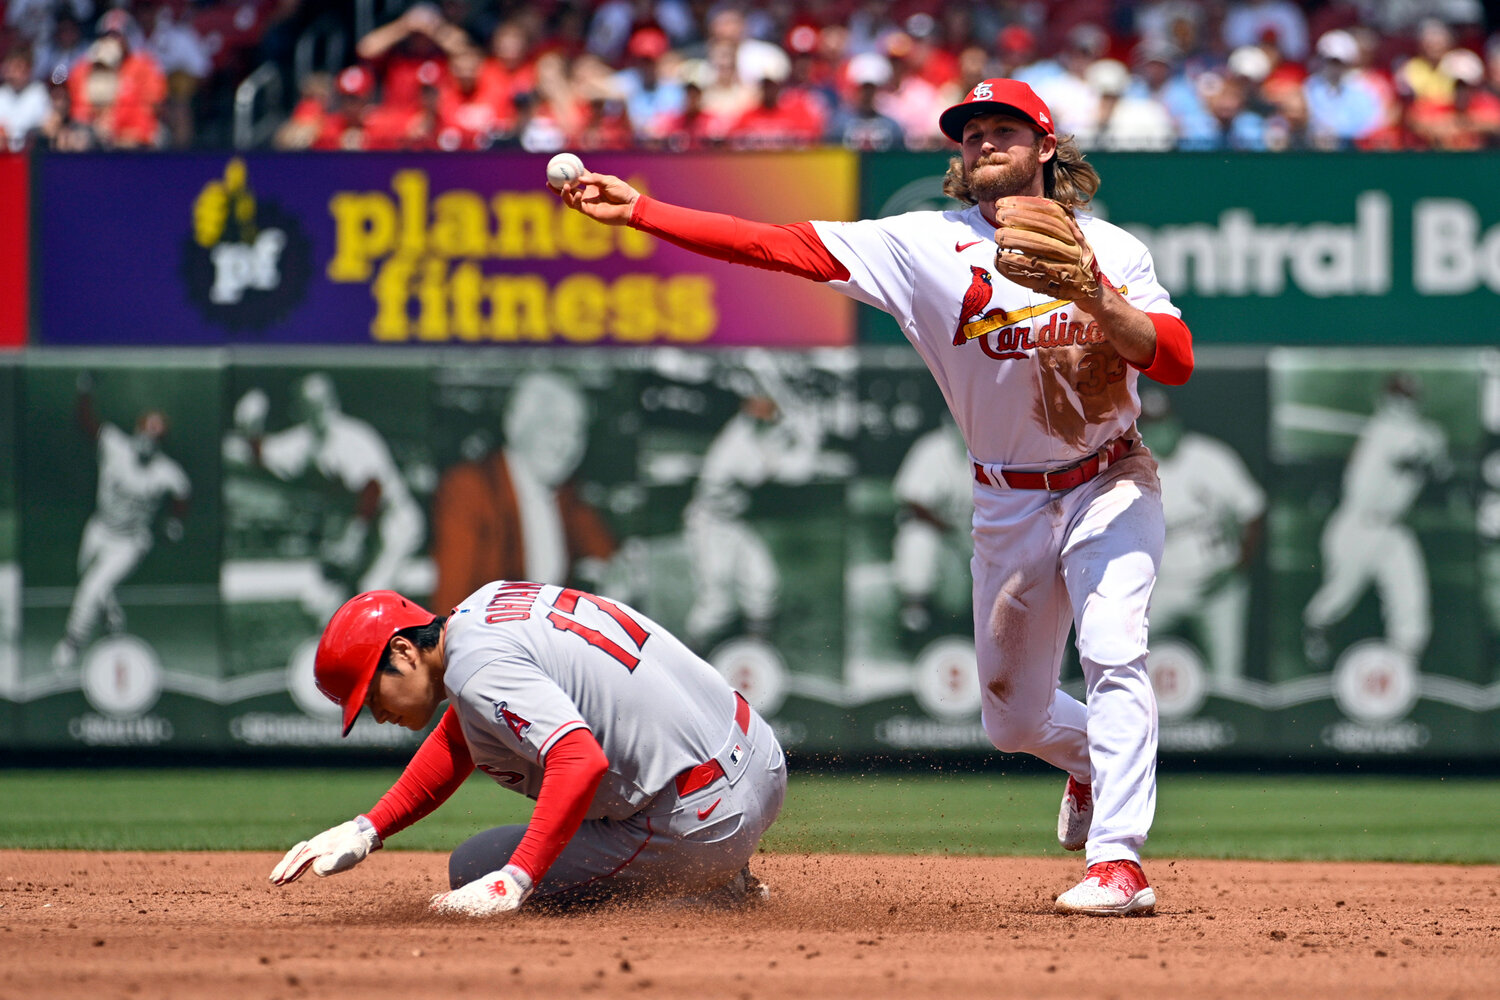 Los Angeles Angels' Shohei Ohtani is forced out at second as St. Louis second baseman Brendan Donovan turns a double play in the third inning of their game, Thursday in St. Louis. (AP Photo/Joe Puetz)